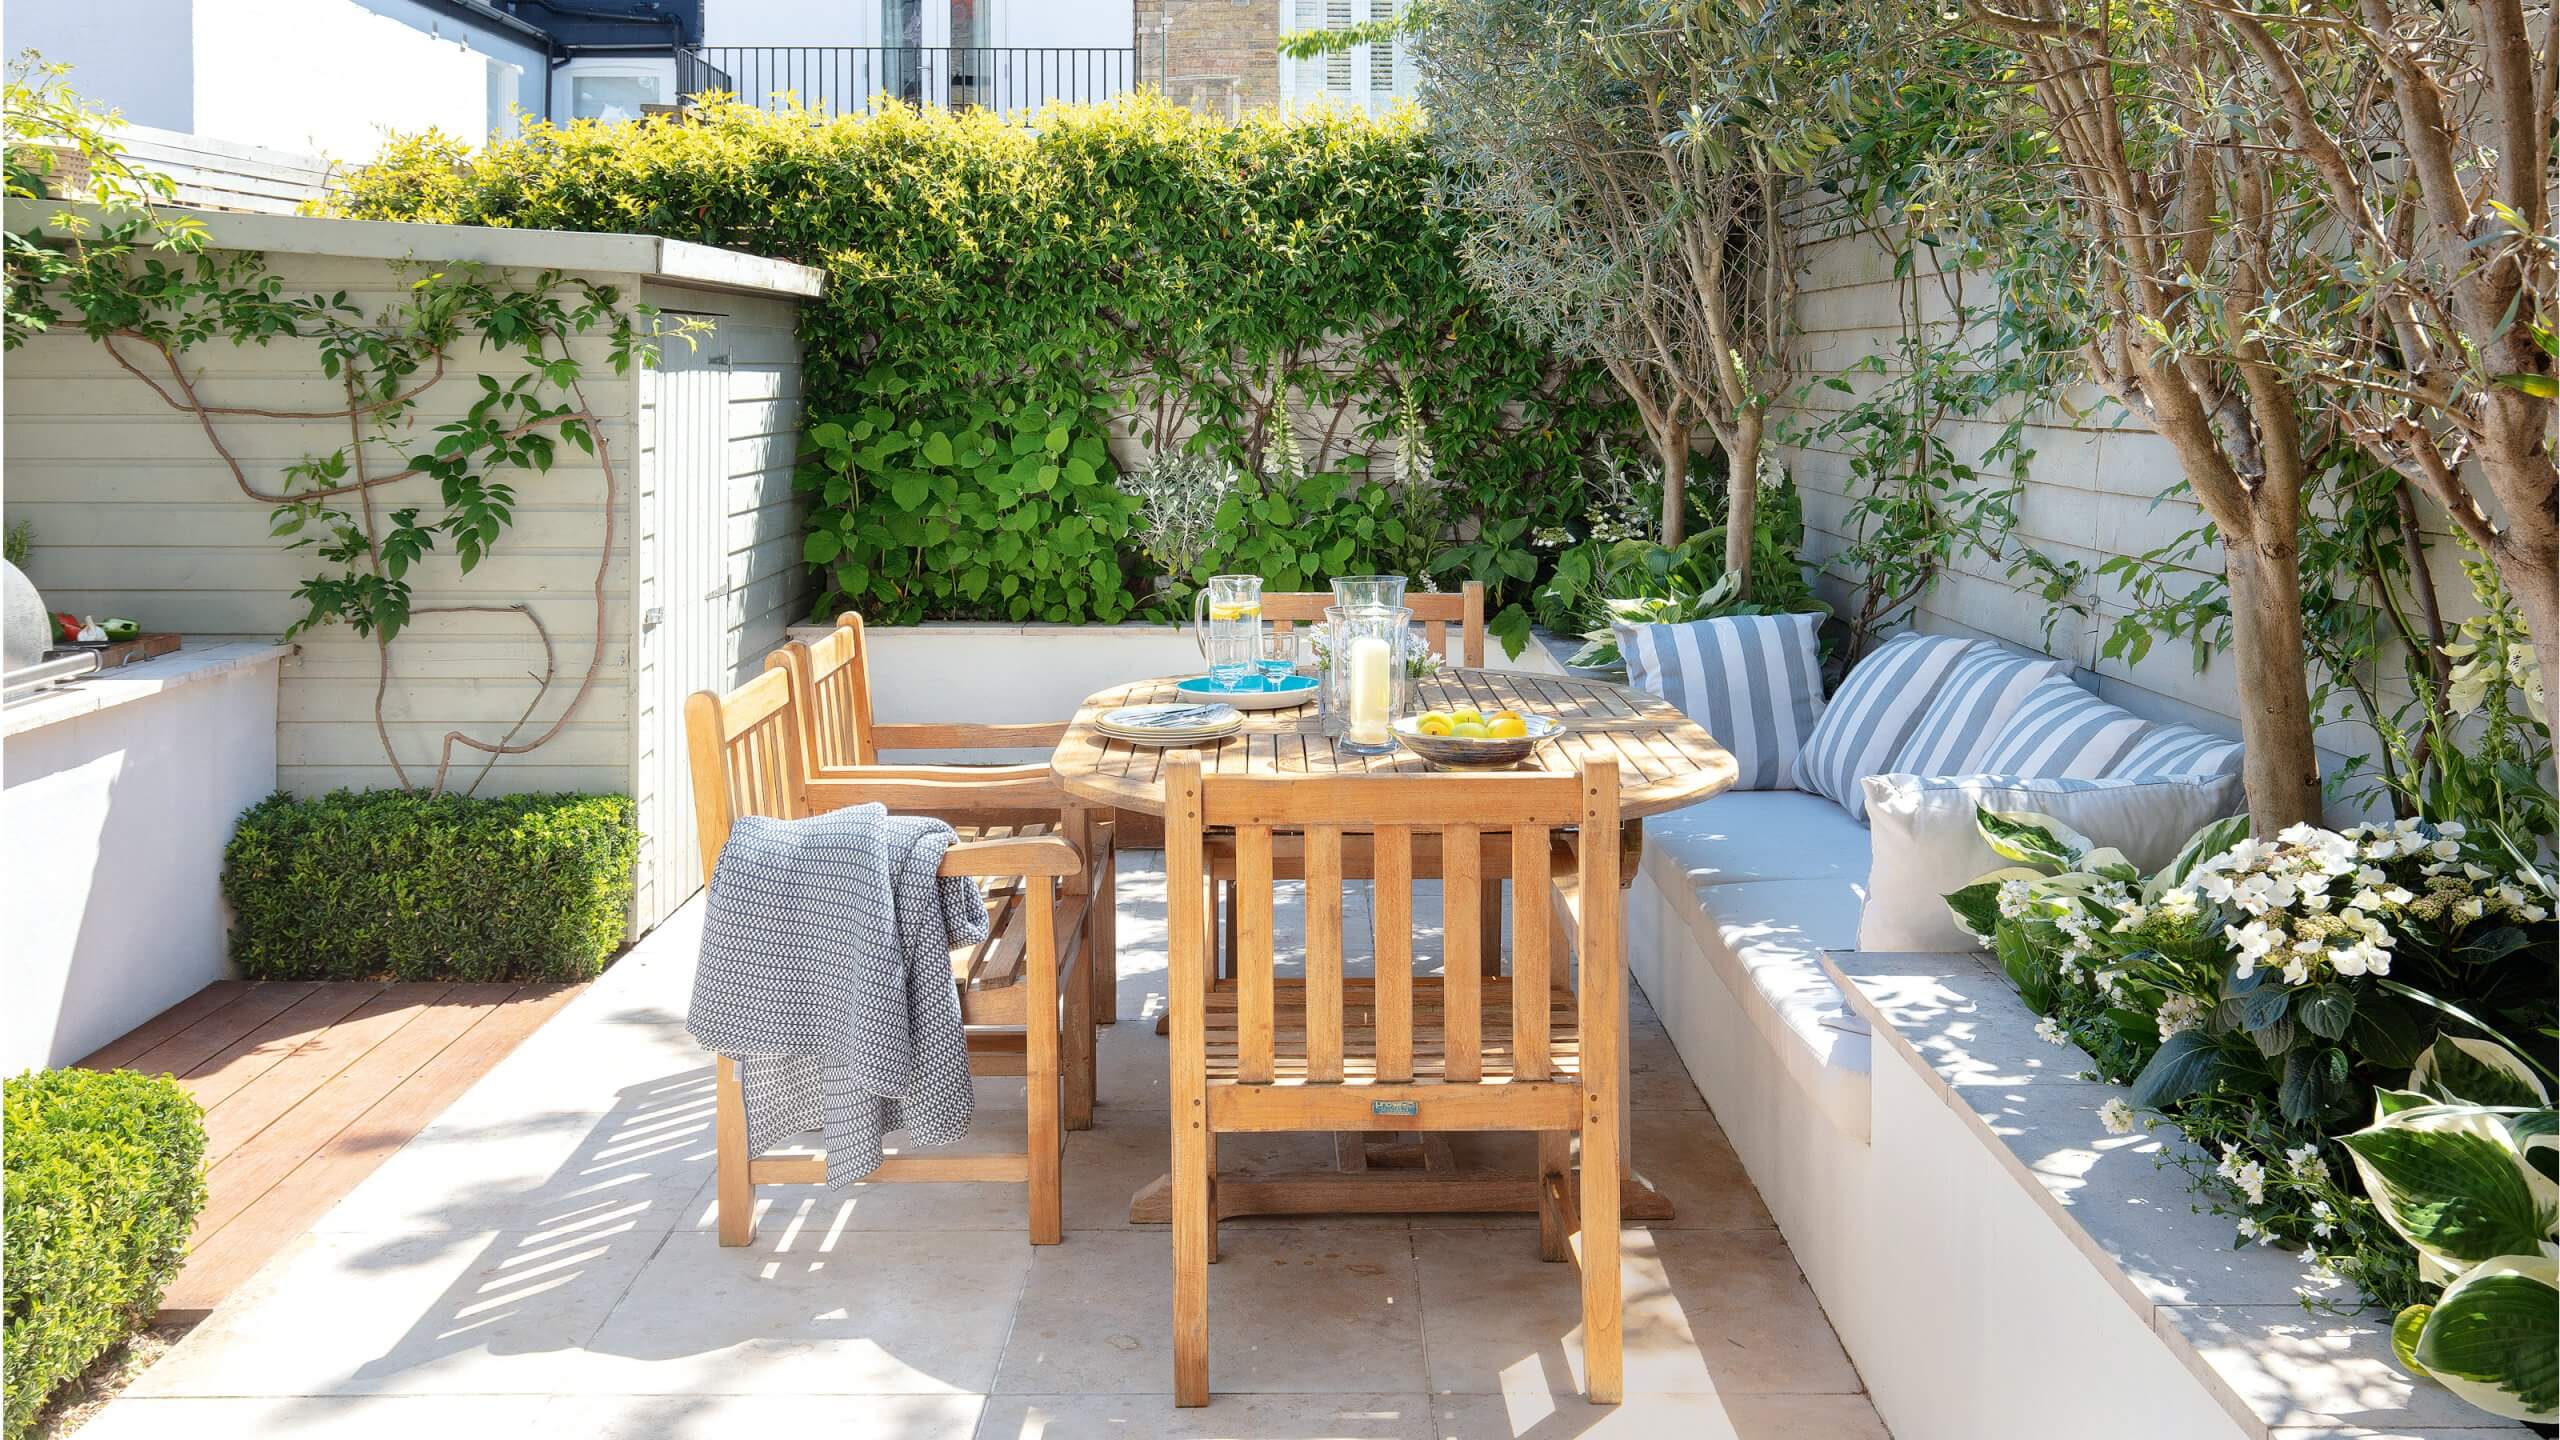 Incorporating Trending and Relaxing Elements to Transform Your Patio